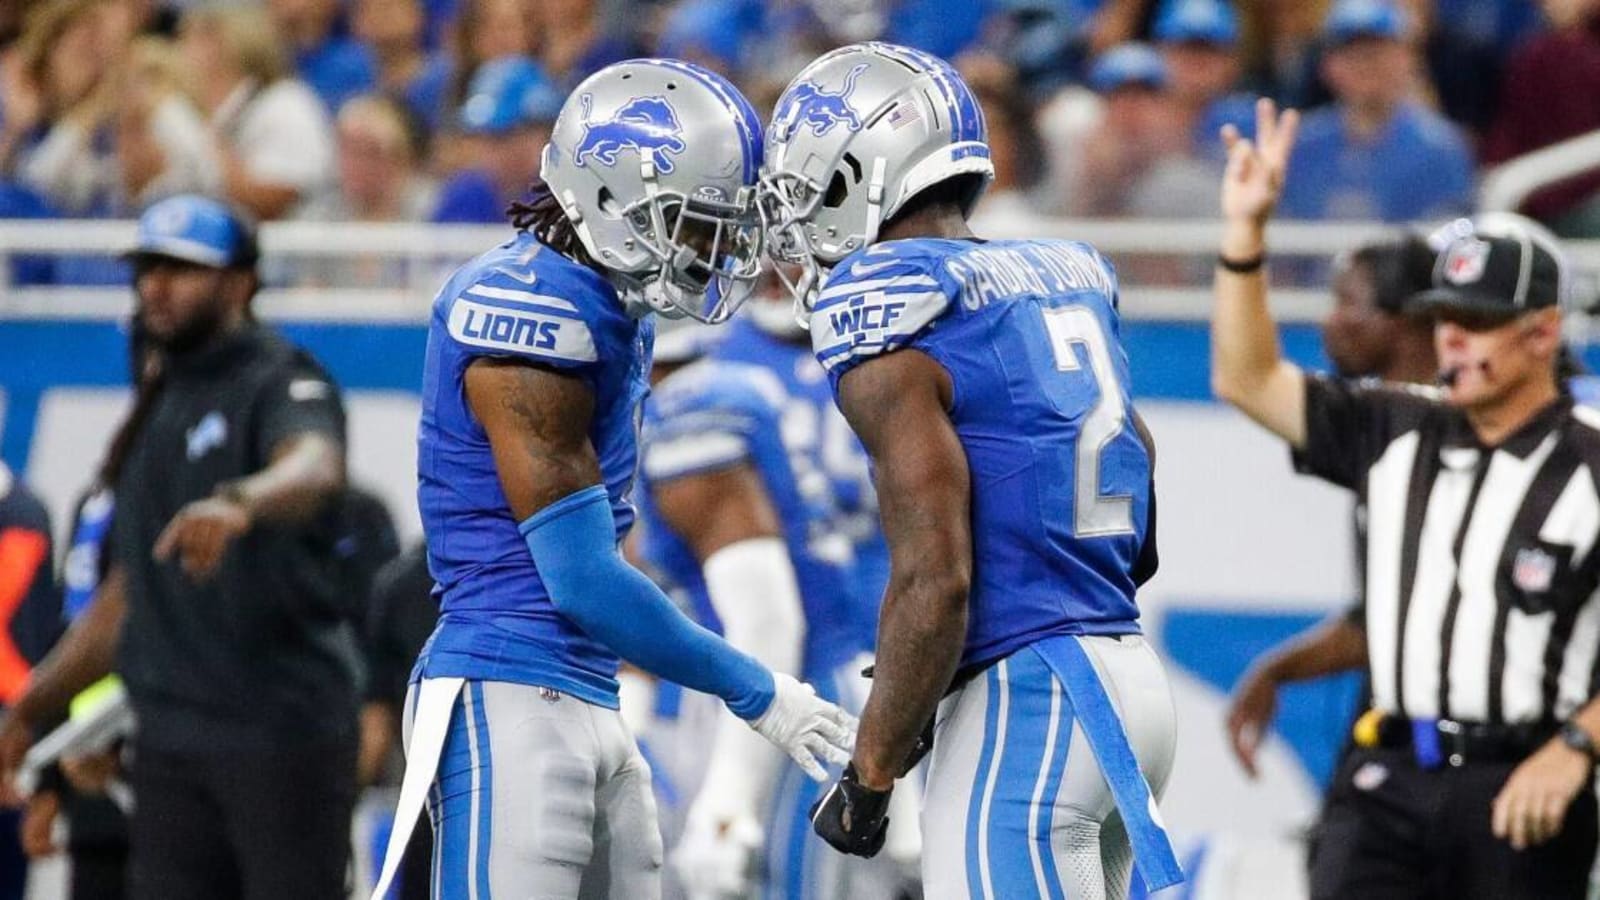 Lions safety C.J. Gardner-Johnson ruled out vs Dallas Cowboys